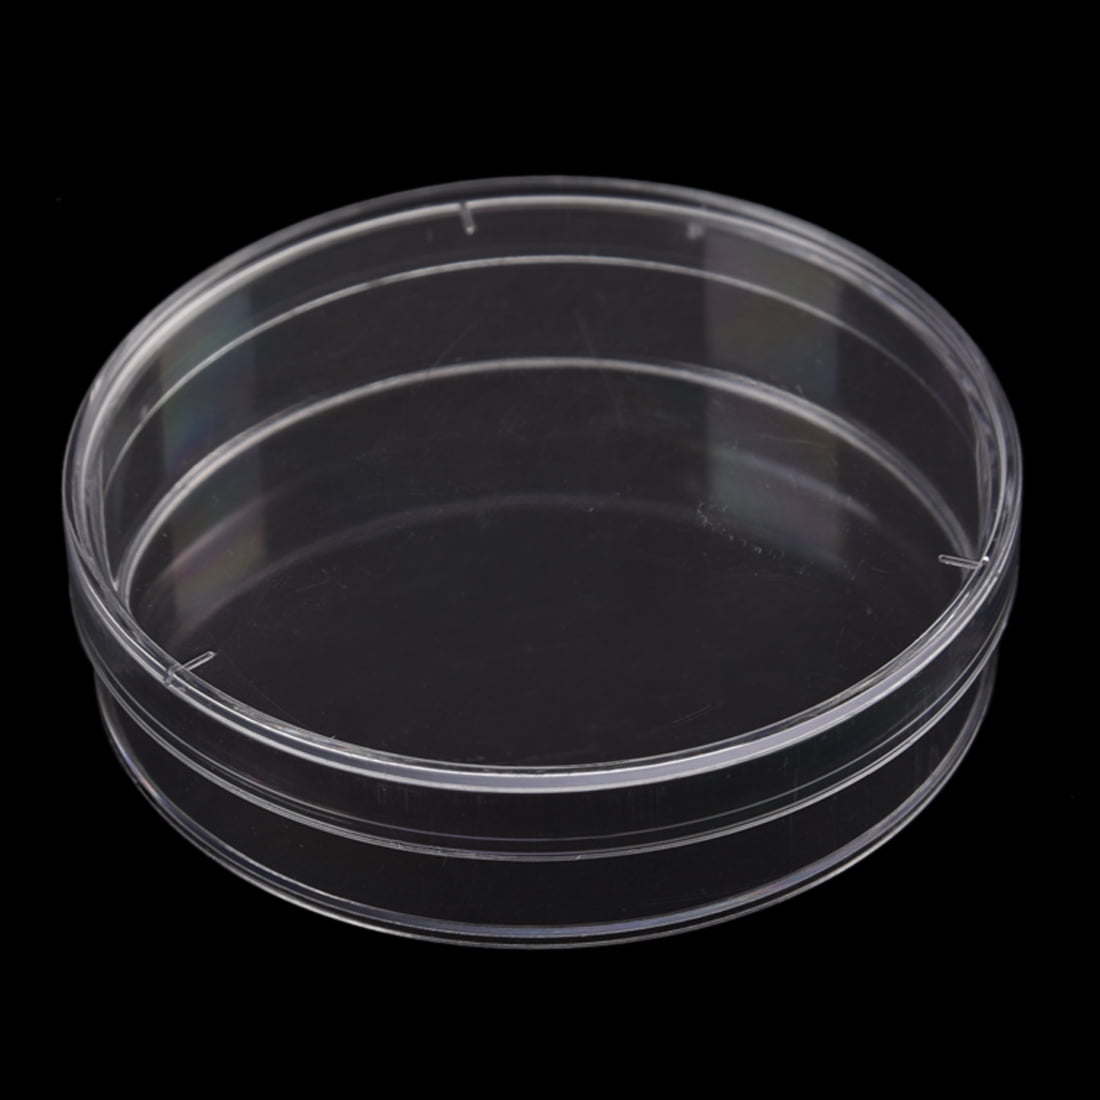 Vaorwne 10Pcs Sterile Petri Dishes w/Lids for Lab Plate Bacterial Yeast 55mm x 15mm